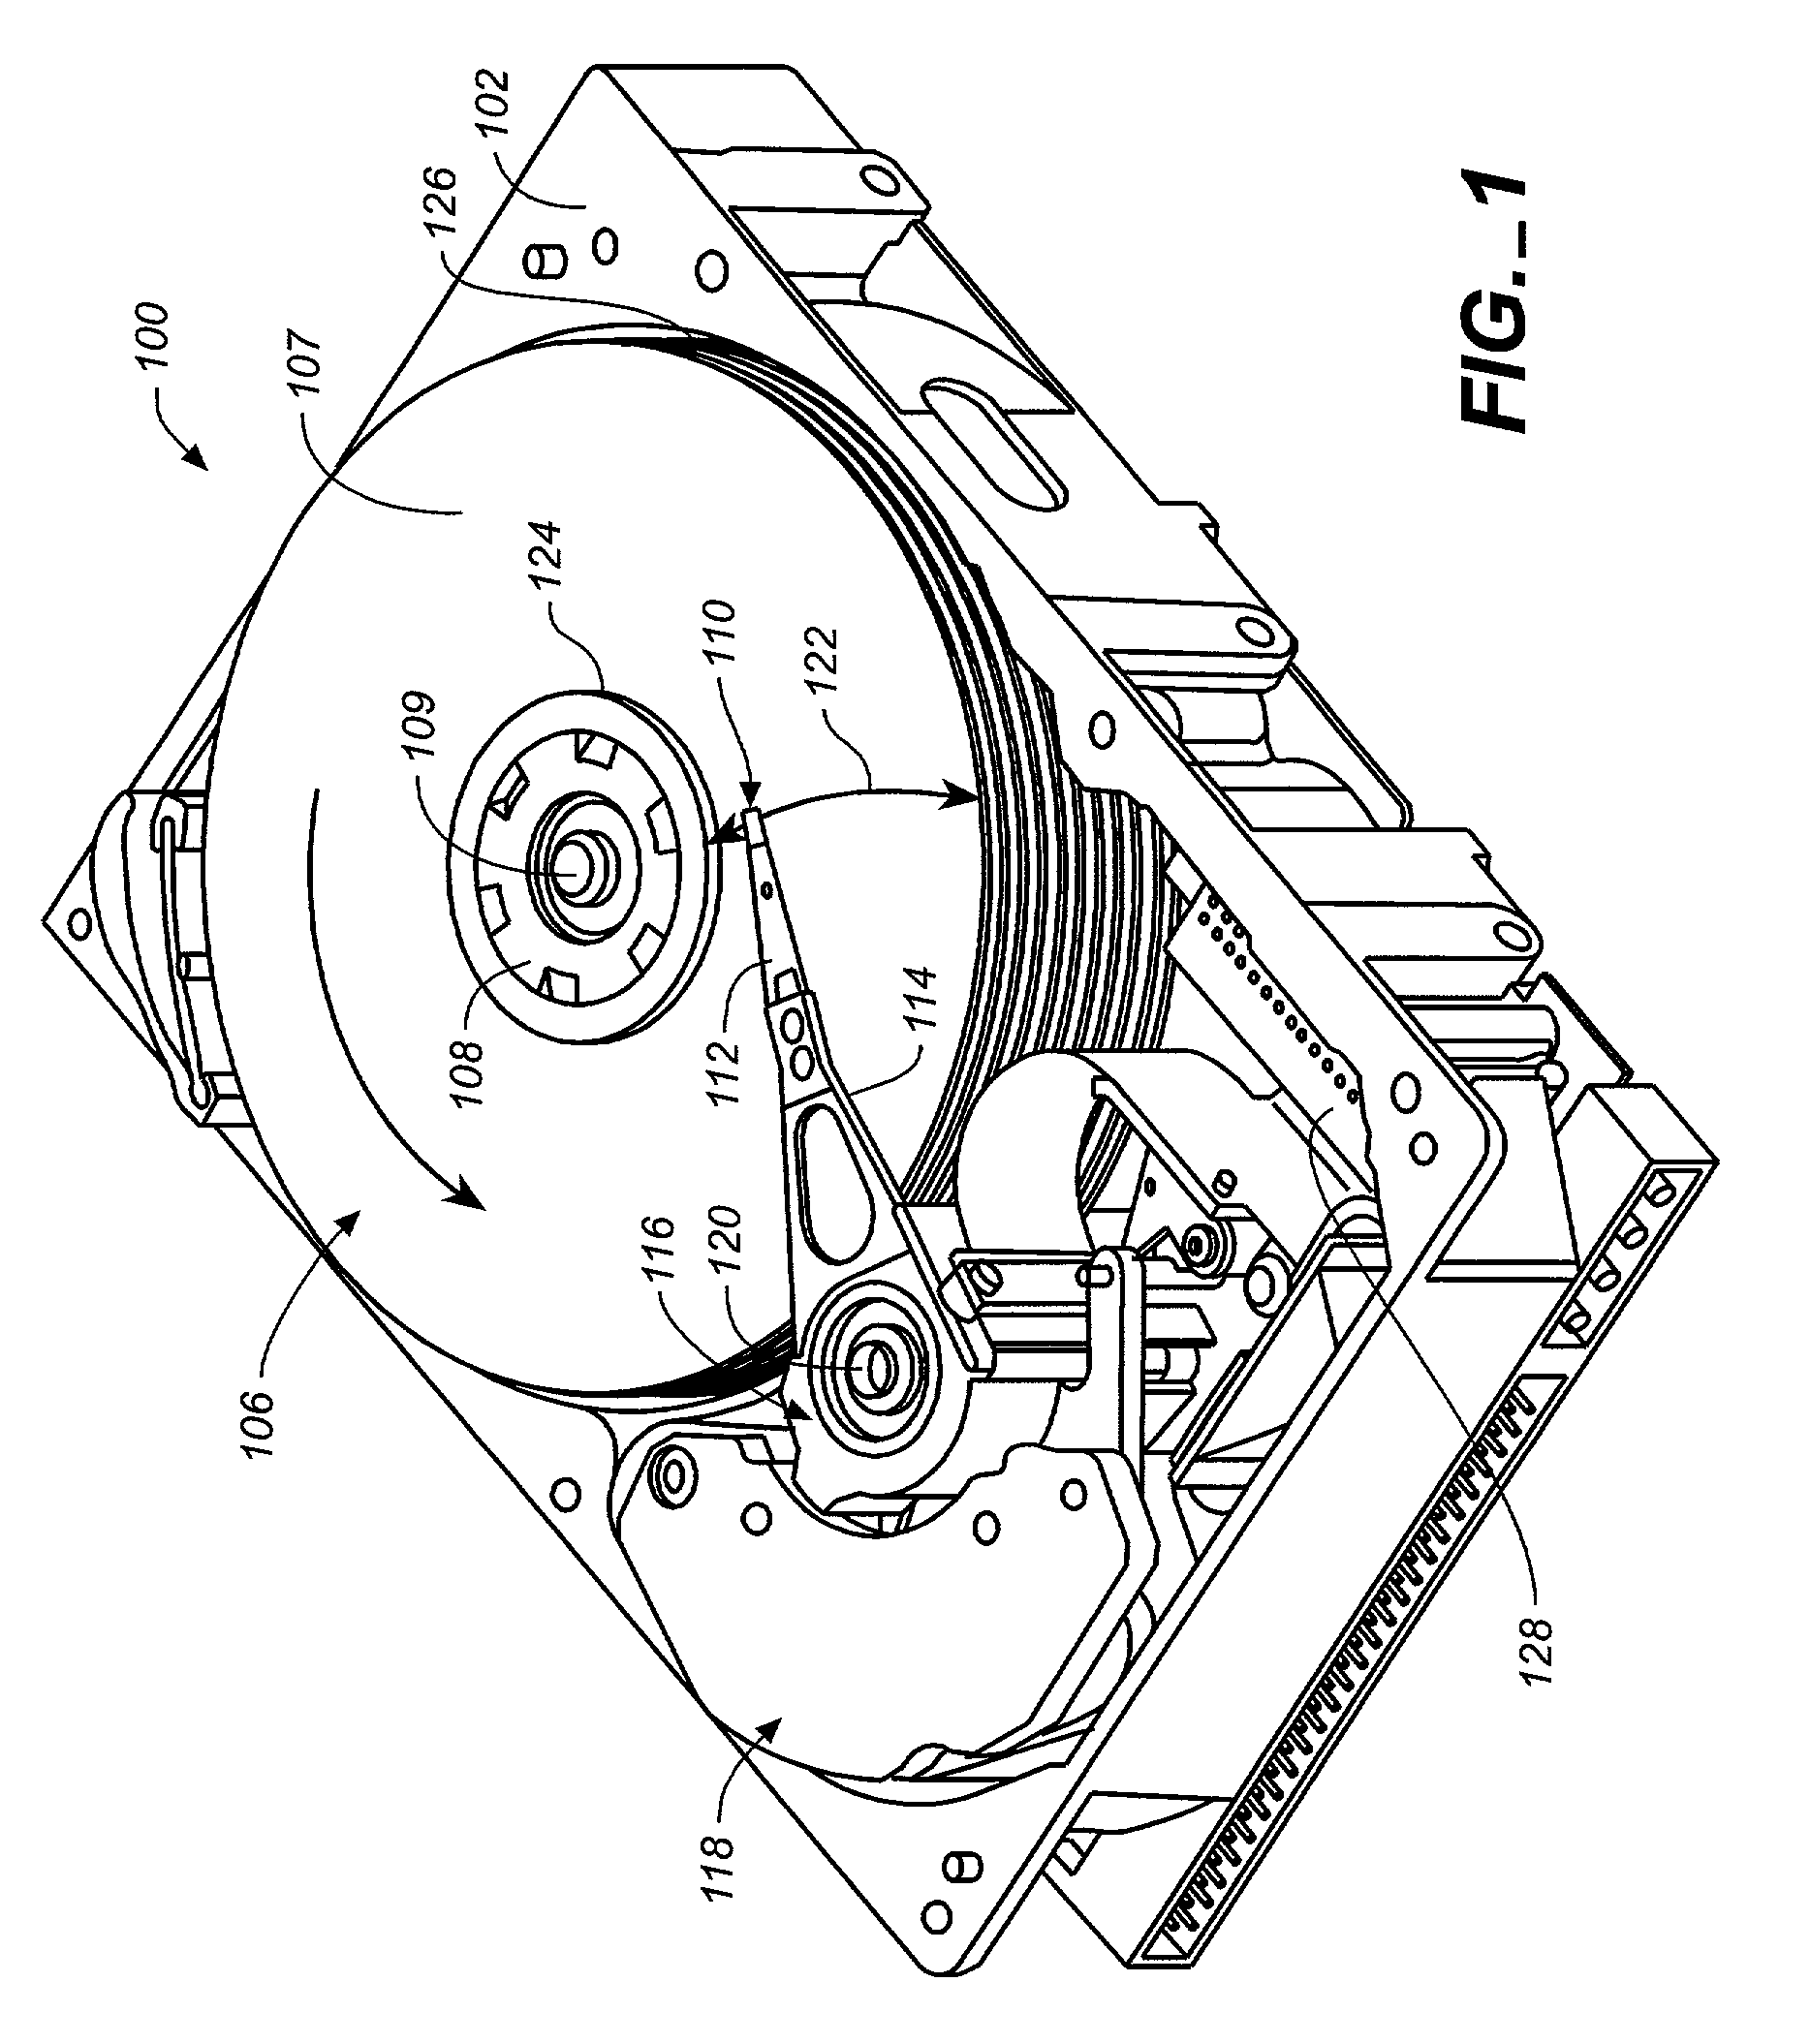 Disc drive air borne filtering channel